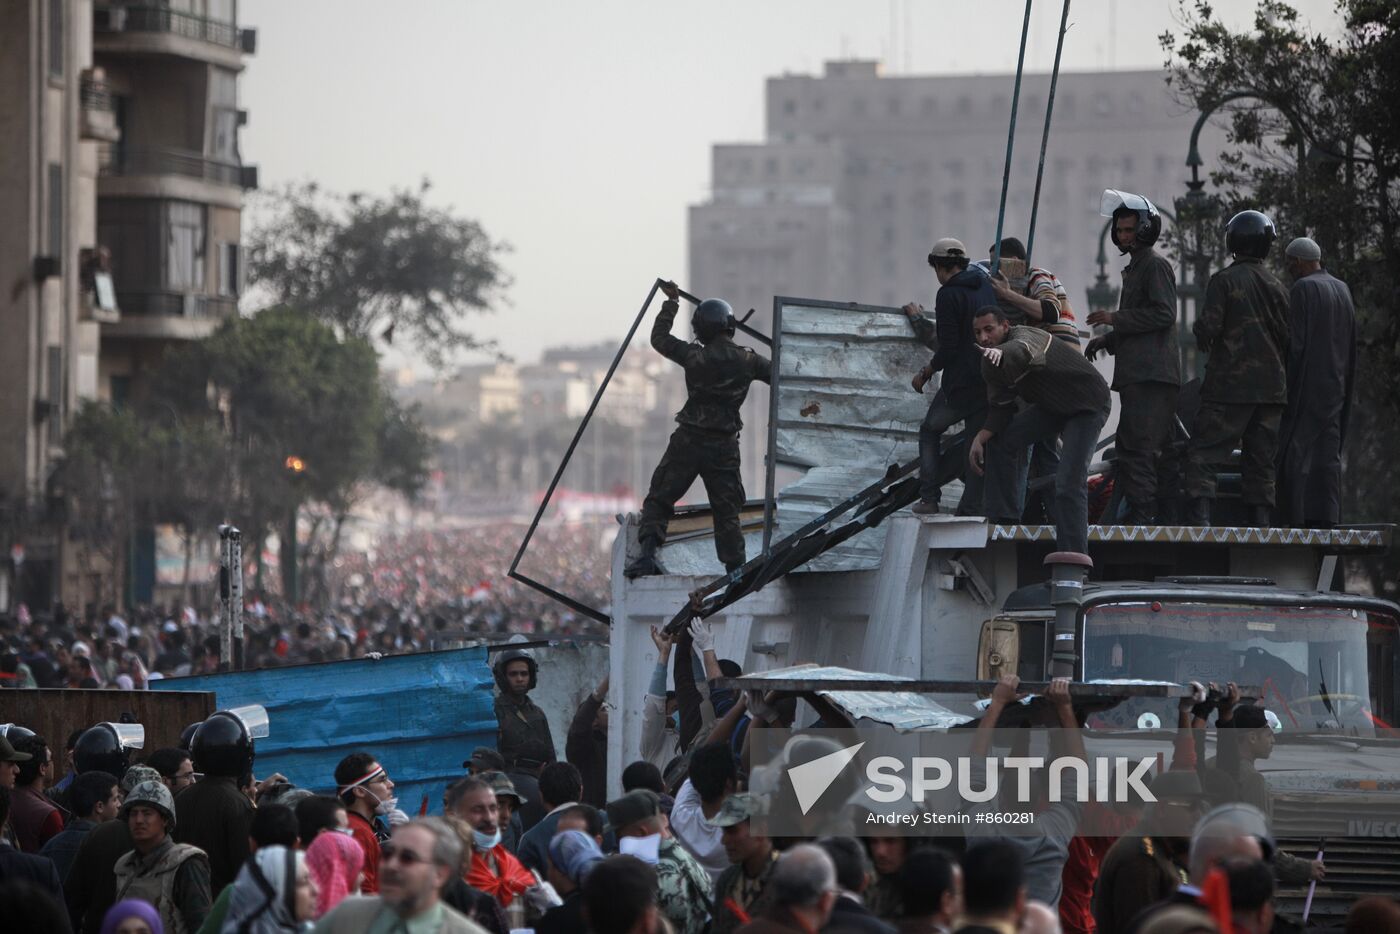 On Tahrir Square in Cairo